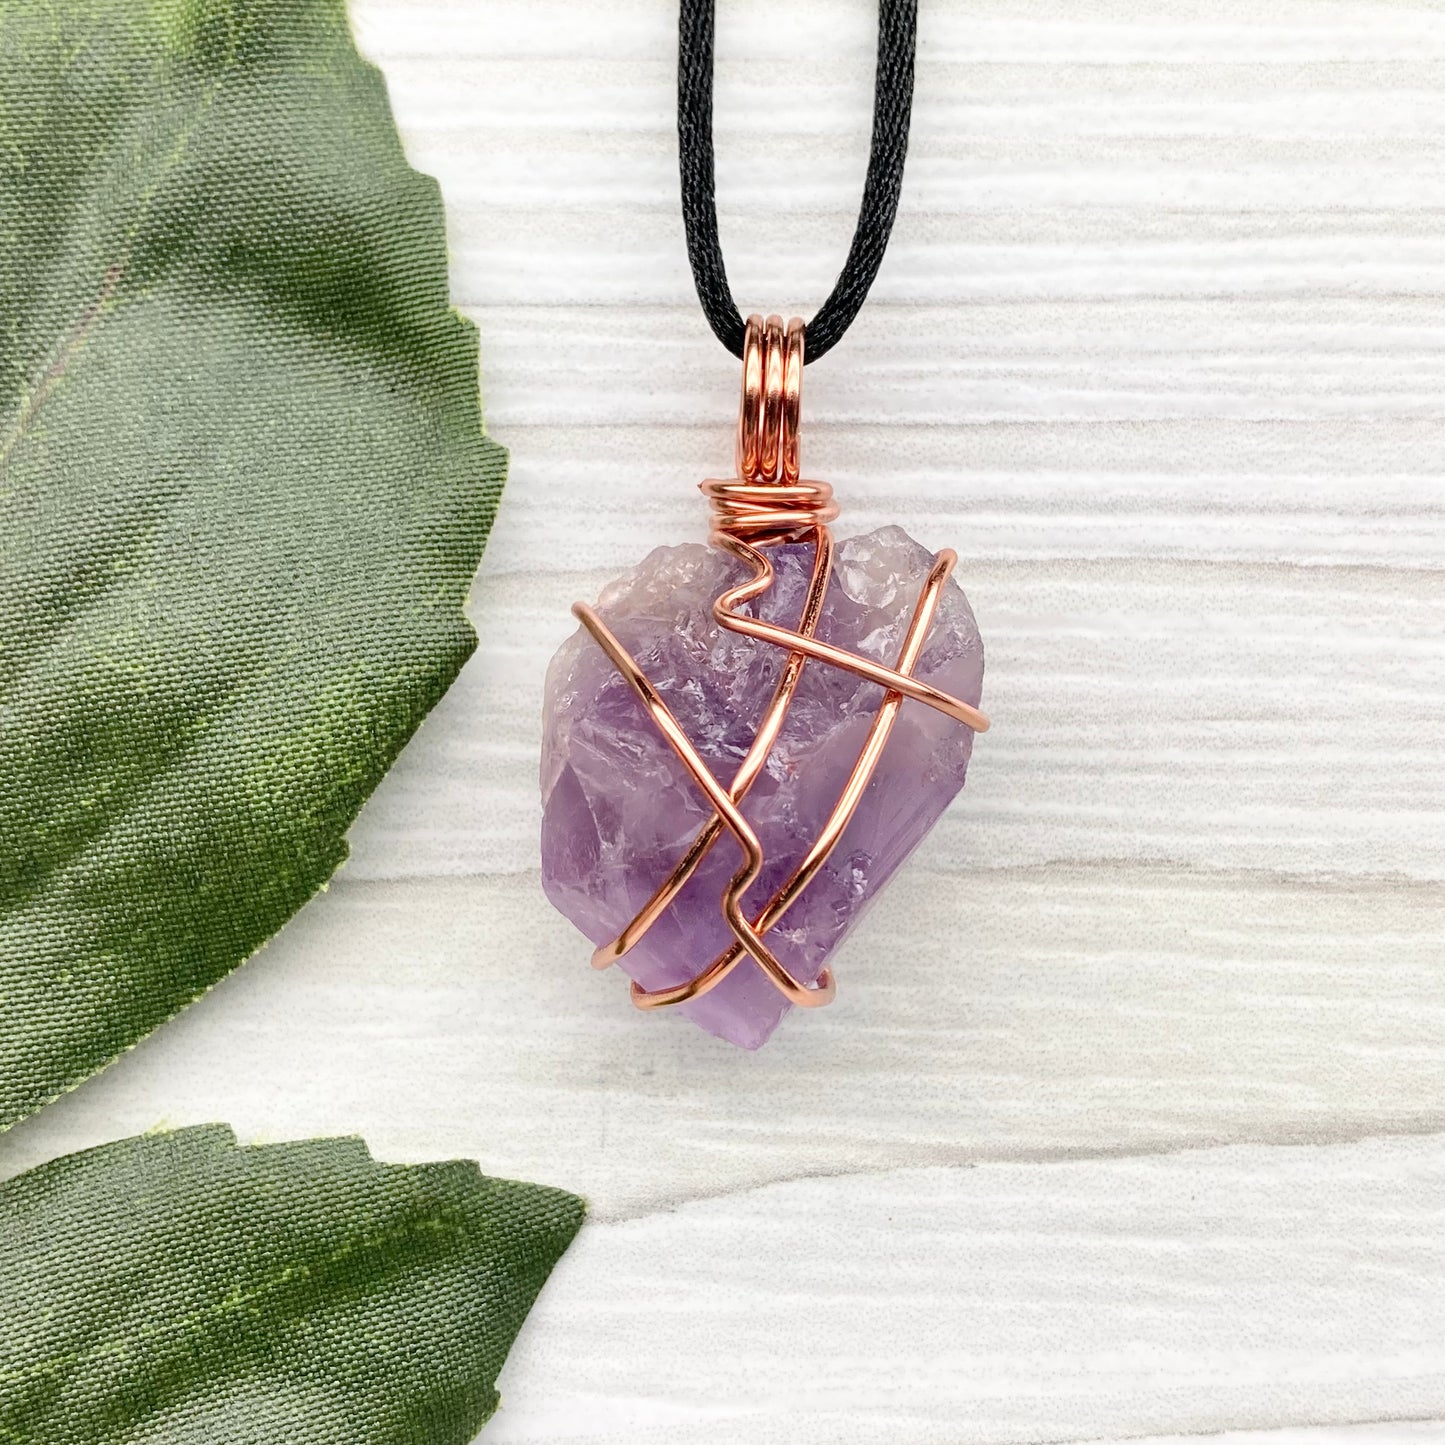 Raw Amethyst Necklace. Natural Purple Amethyst Crystal Wrapped With Tarnish Resistant Copper Wire. Purple Stone Pendant. Comes On A Black Necklace. Aquarius Zodiac Crystal Jewelry. Handmade In Tennessee.